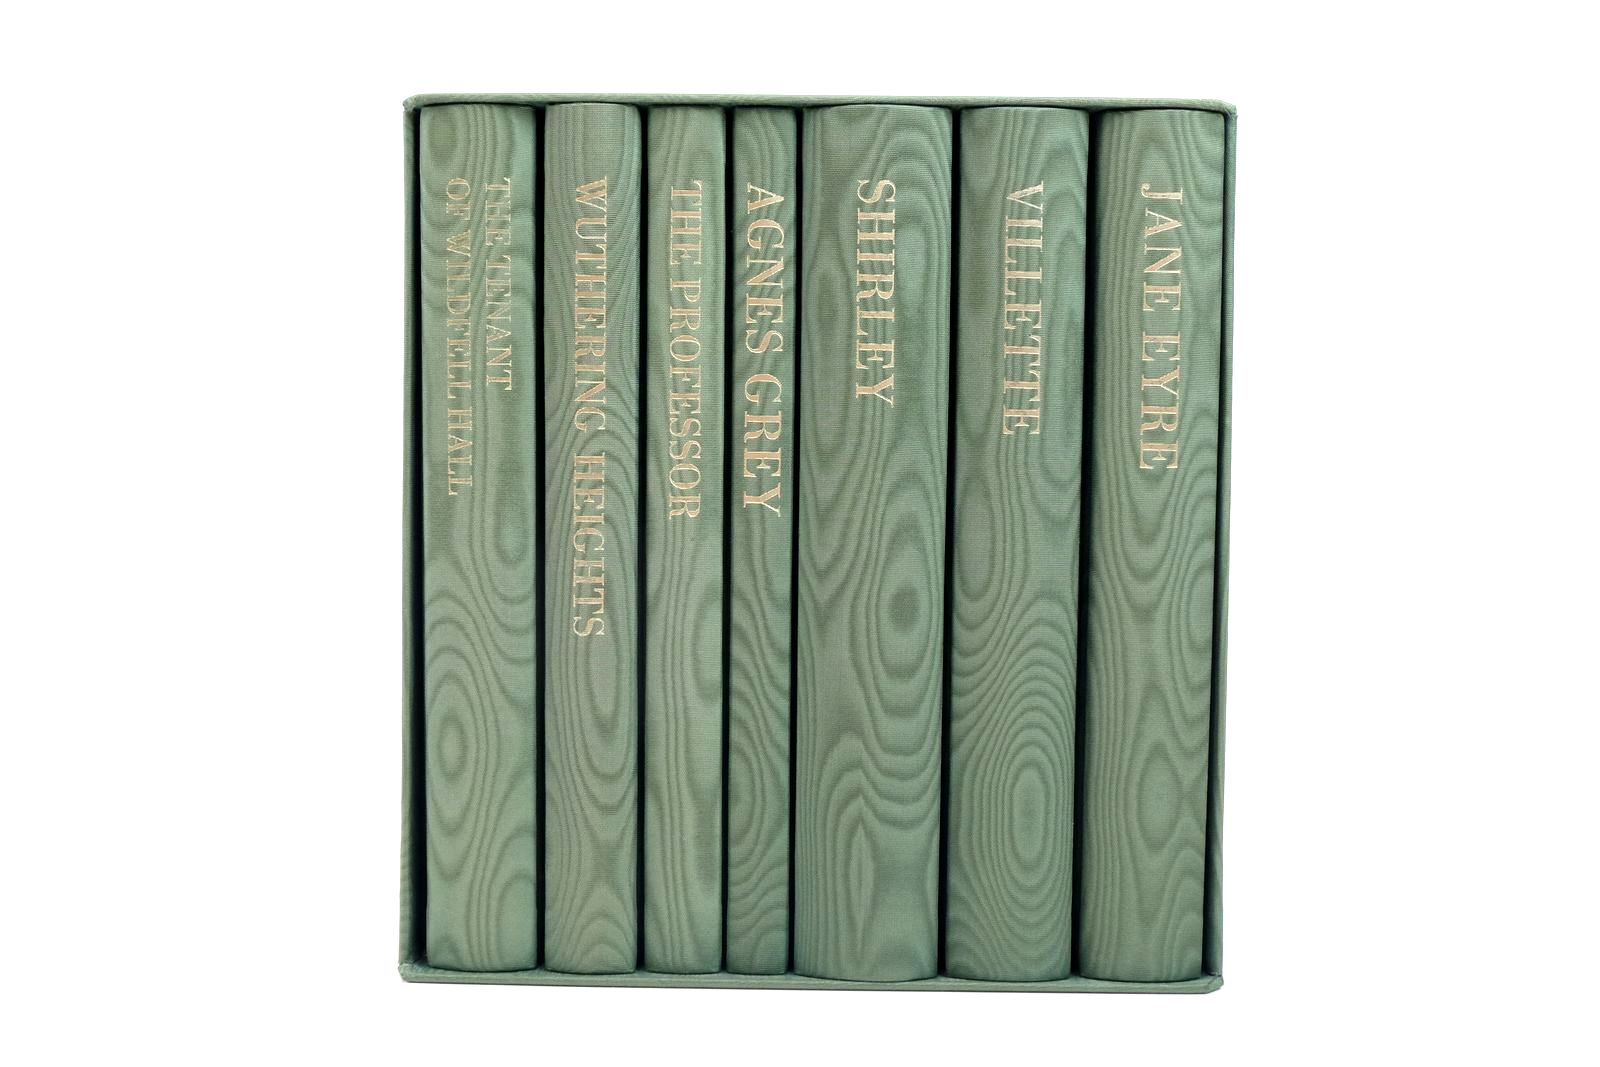 Photo of CHARLOTTE, EMILY & ANNE BRONTE THE COMPLETE NOVELS (7 VOLUMES) written by Bronte, Charlotte
Bronte, Emily
Bronte, Anne illustrated by Forster, Peter
Brockway, Harry
Stephens, Ian
et al.,  published by Folio Society (STOCK CODE: 2138404)  for sale by Stella & Rose's Books